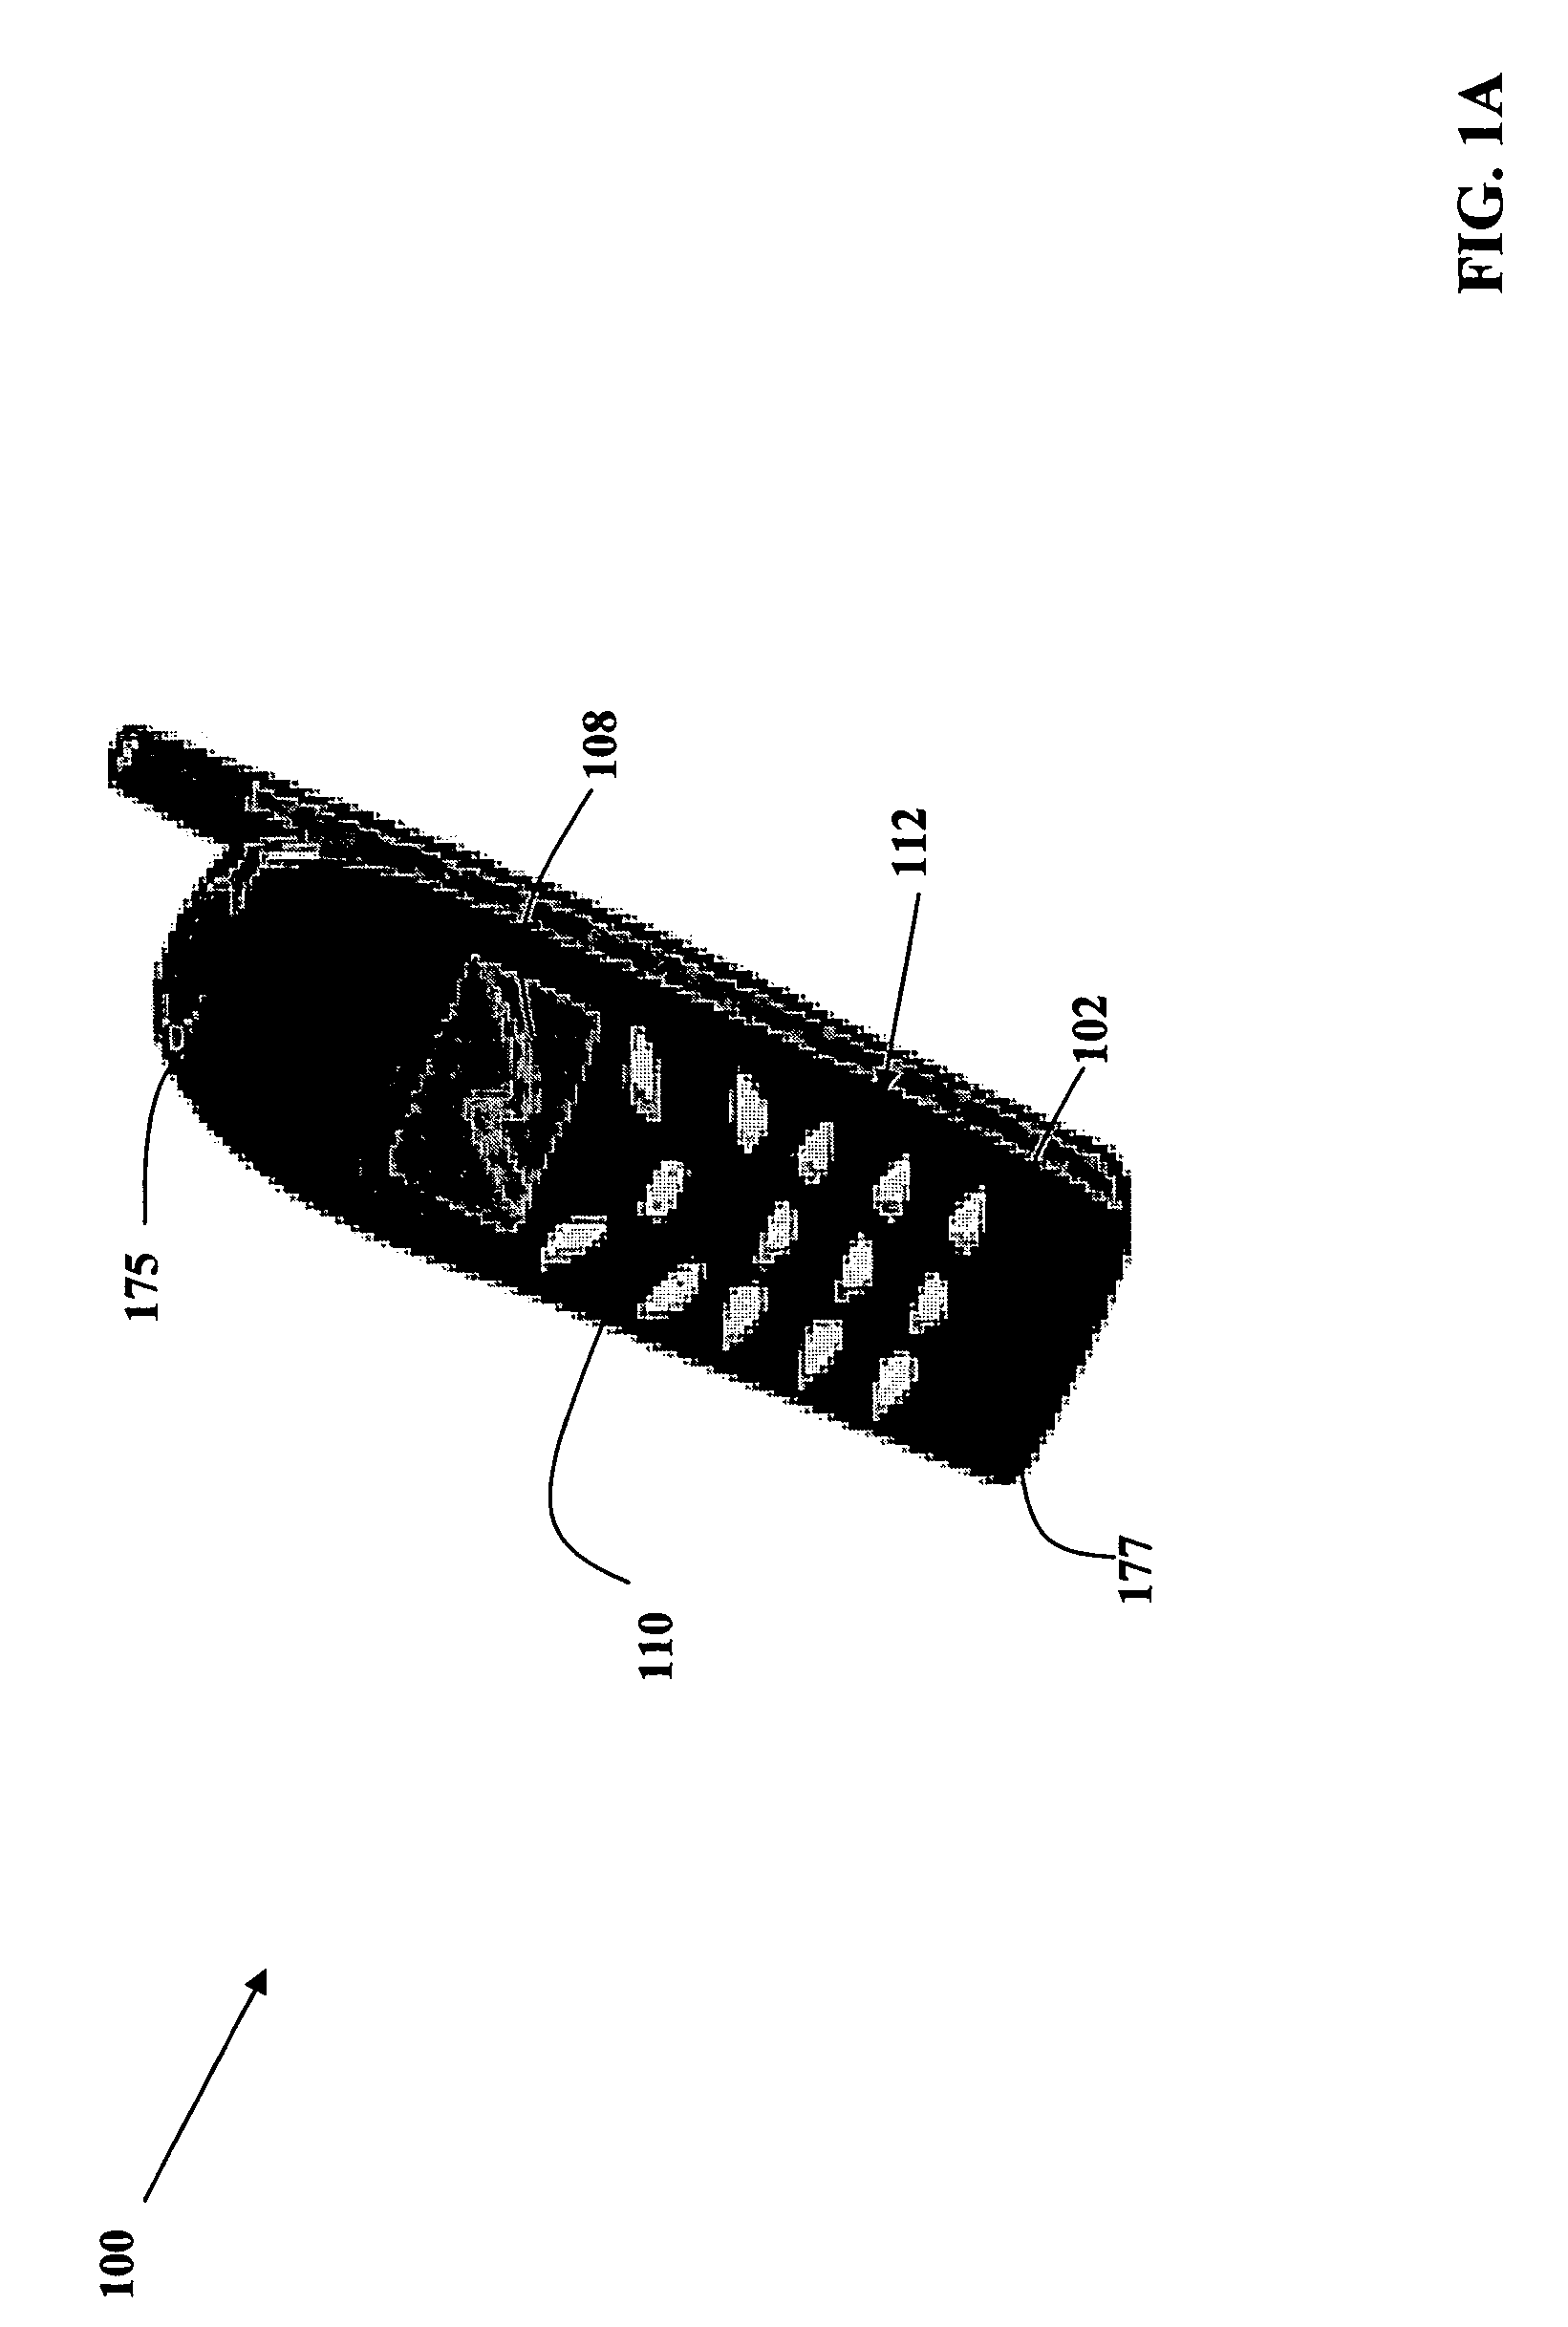 Method and apparatus for proximity sensing in a portable electronic device